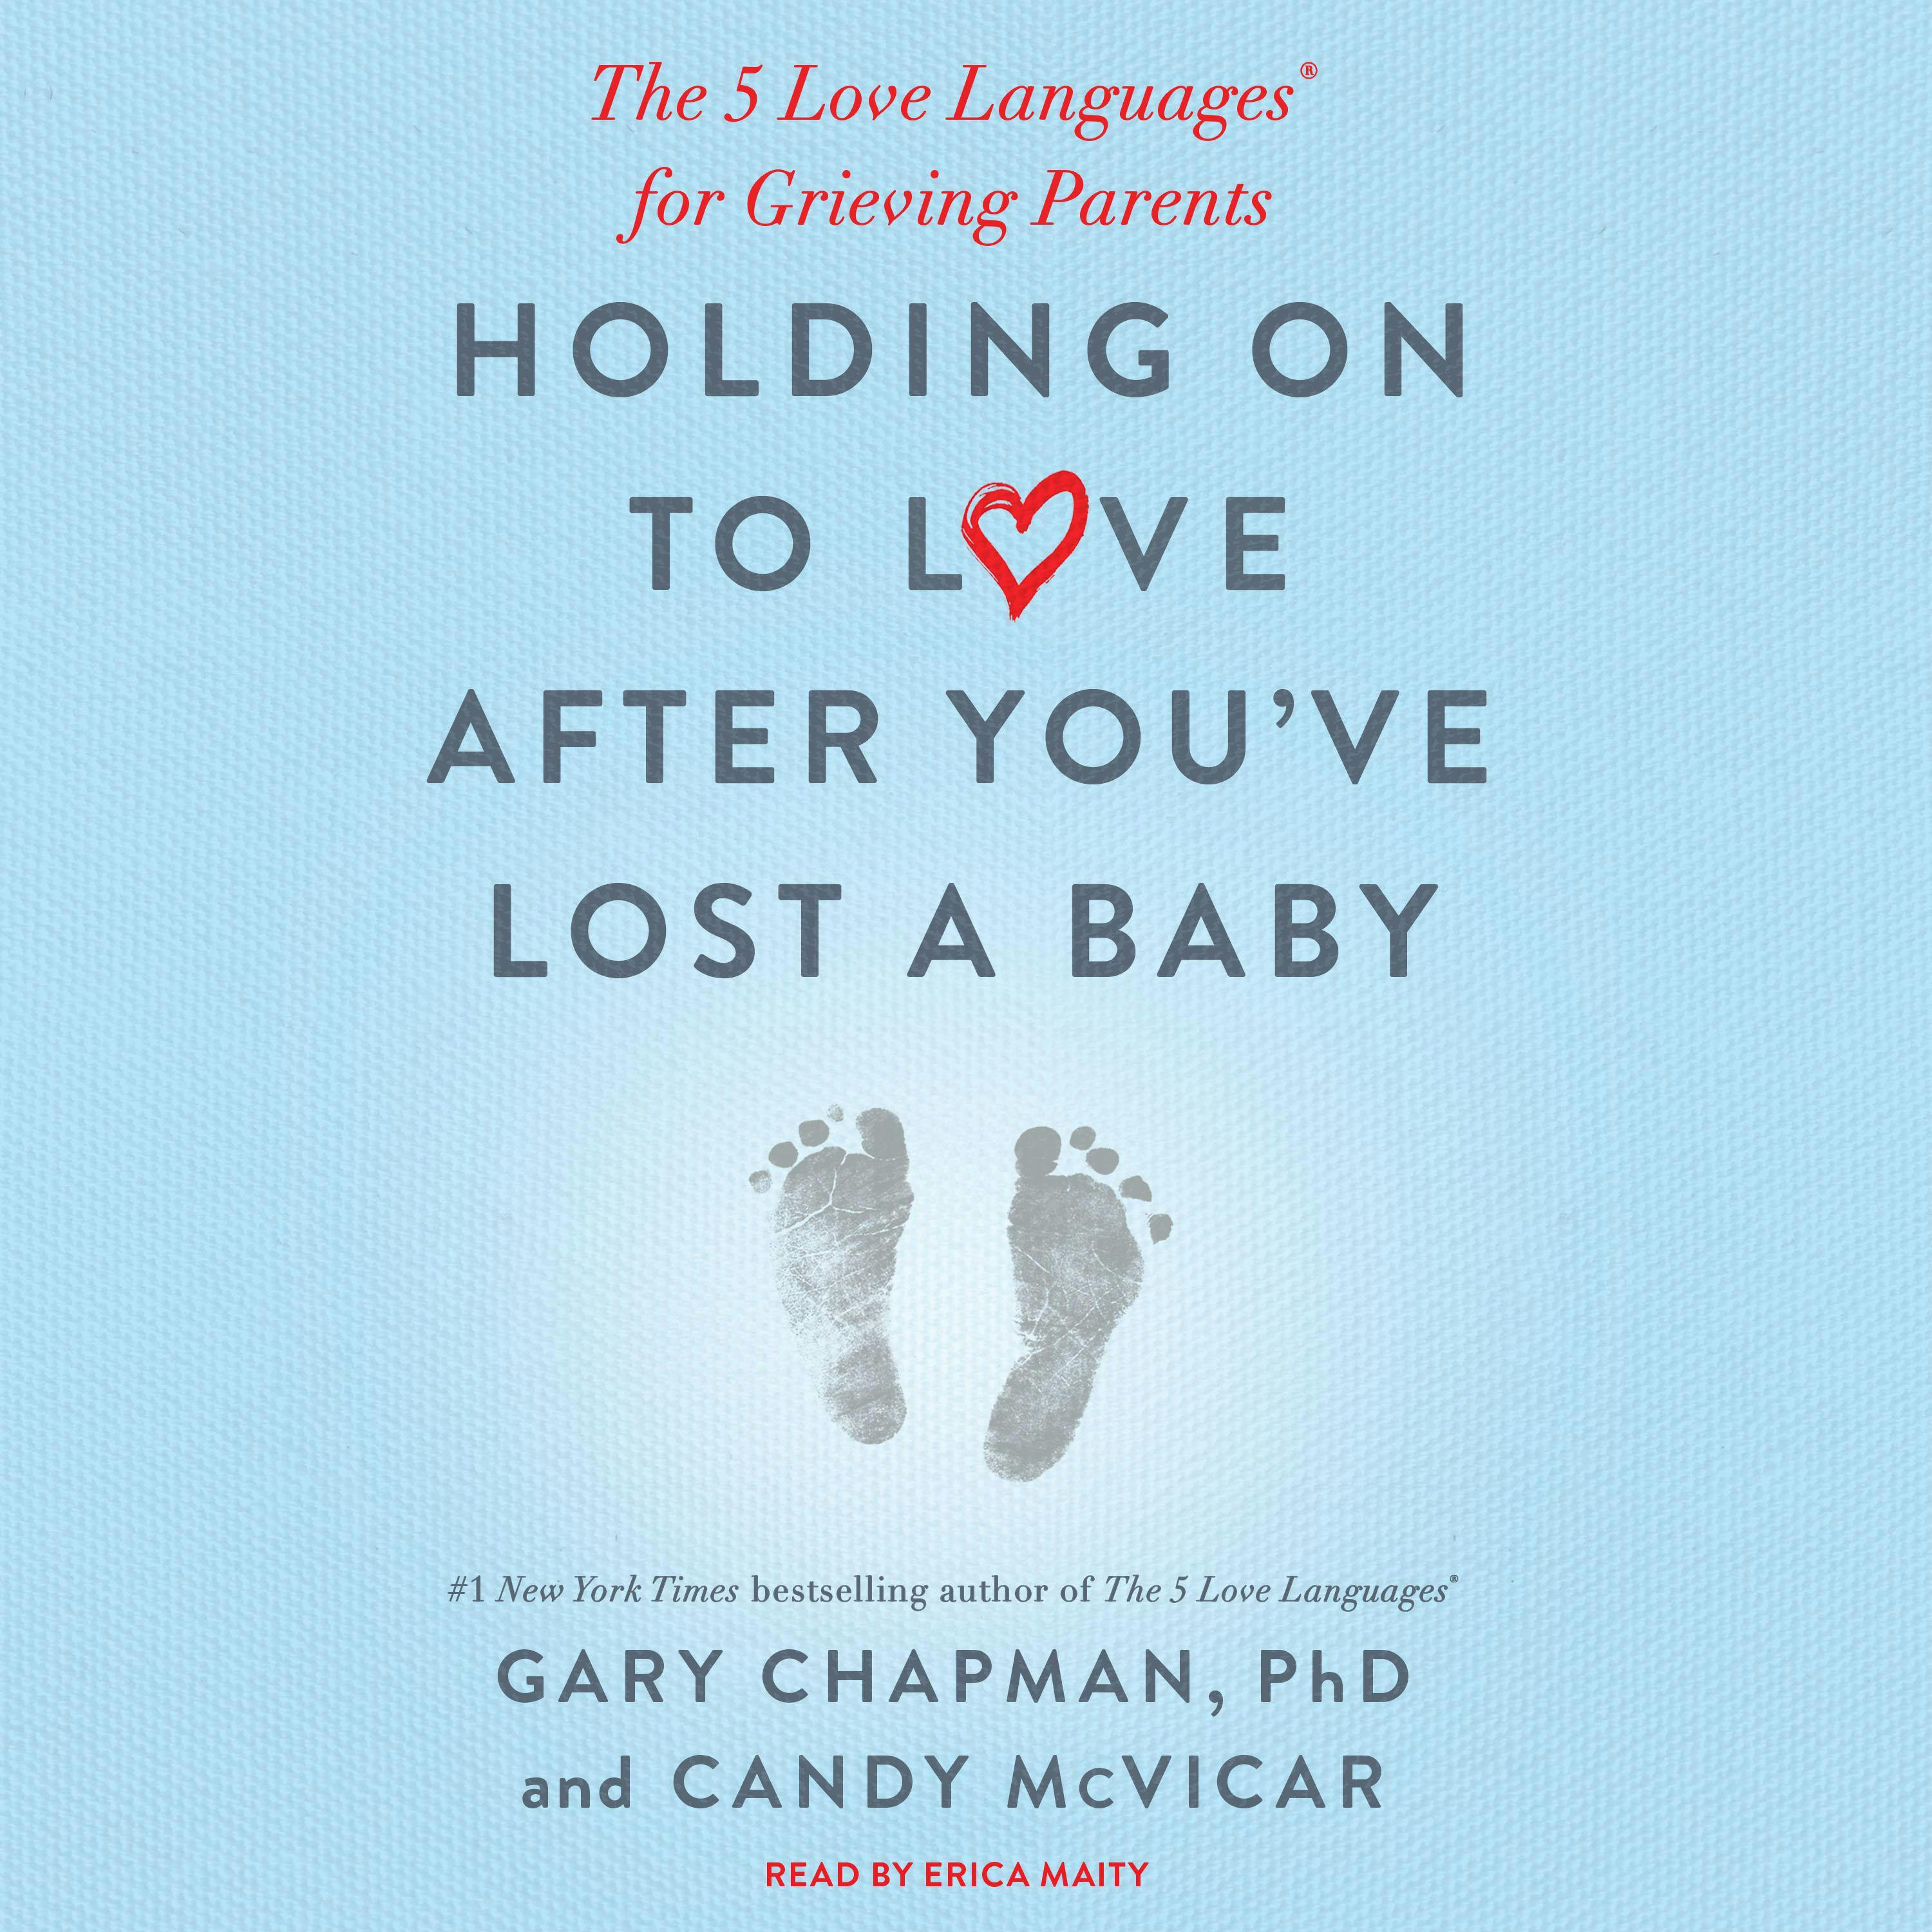 Holding on to Love After You've Lost a Baby: The 5 Love Languages® for Grieving Parents - Gary Chapman, Candy McVicar